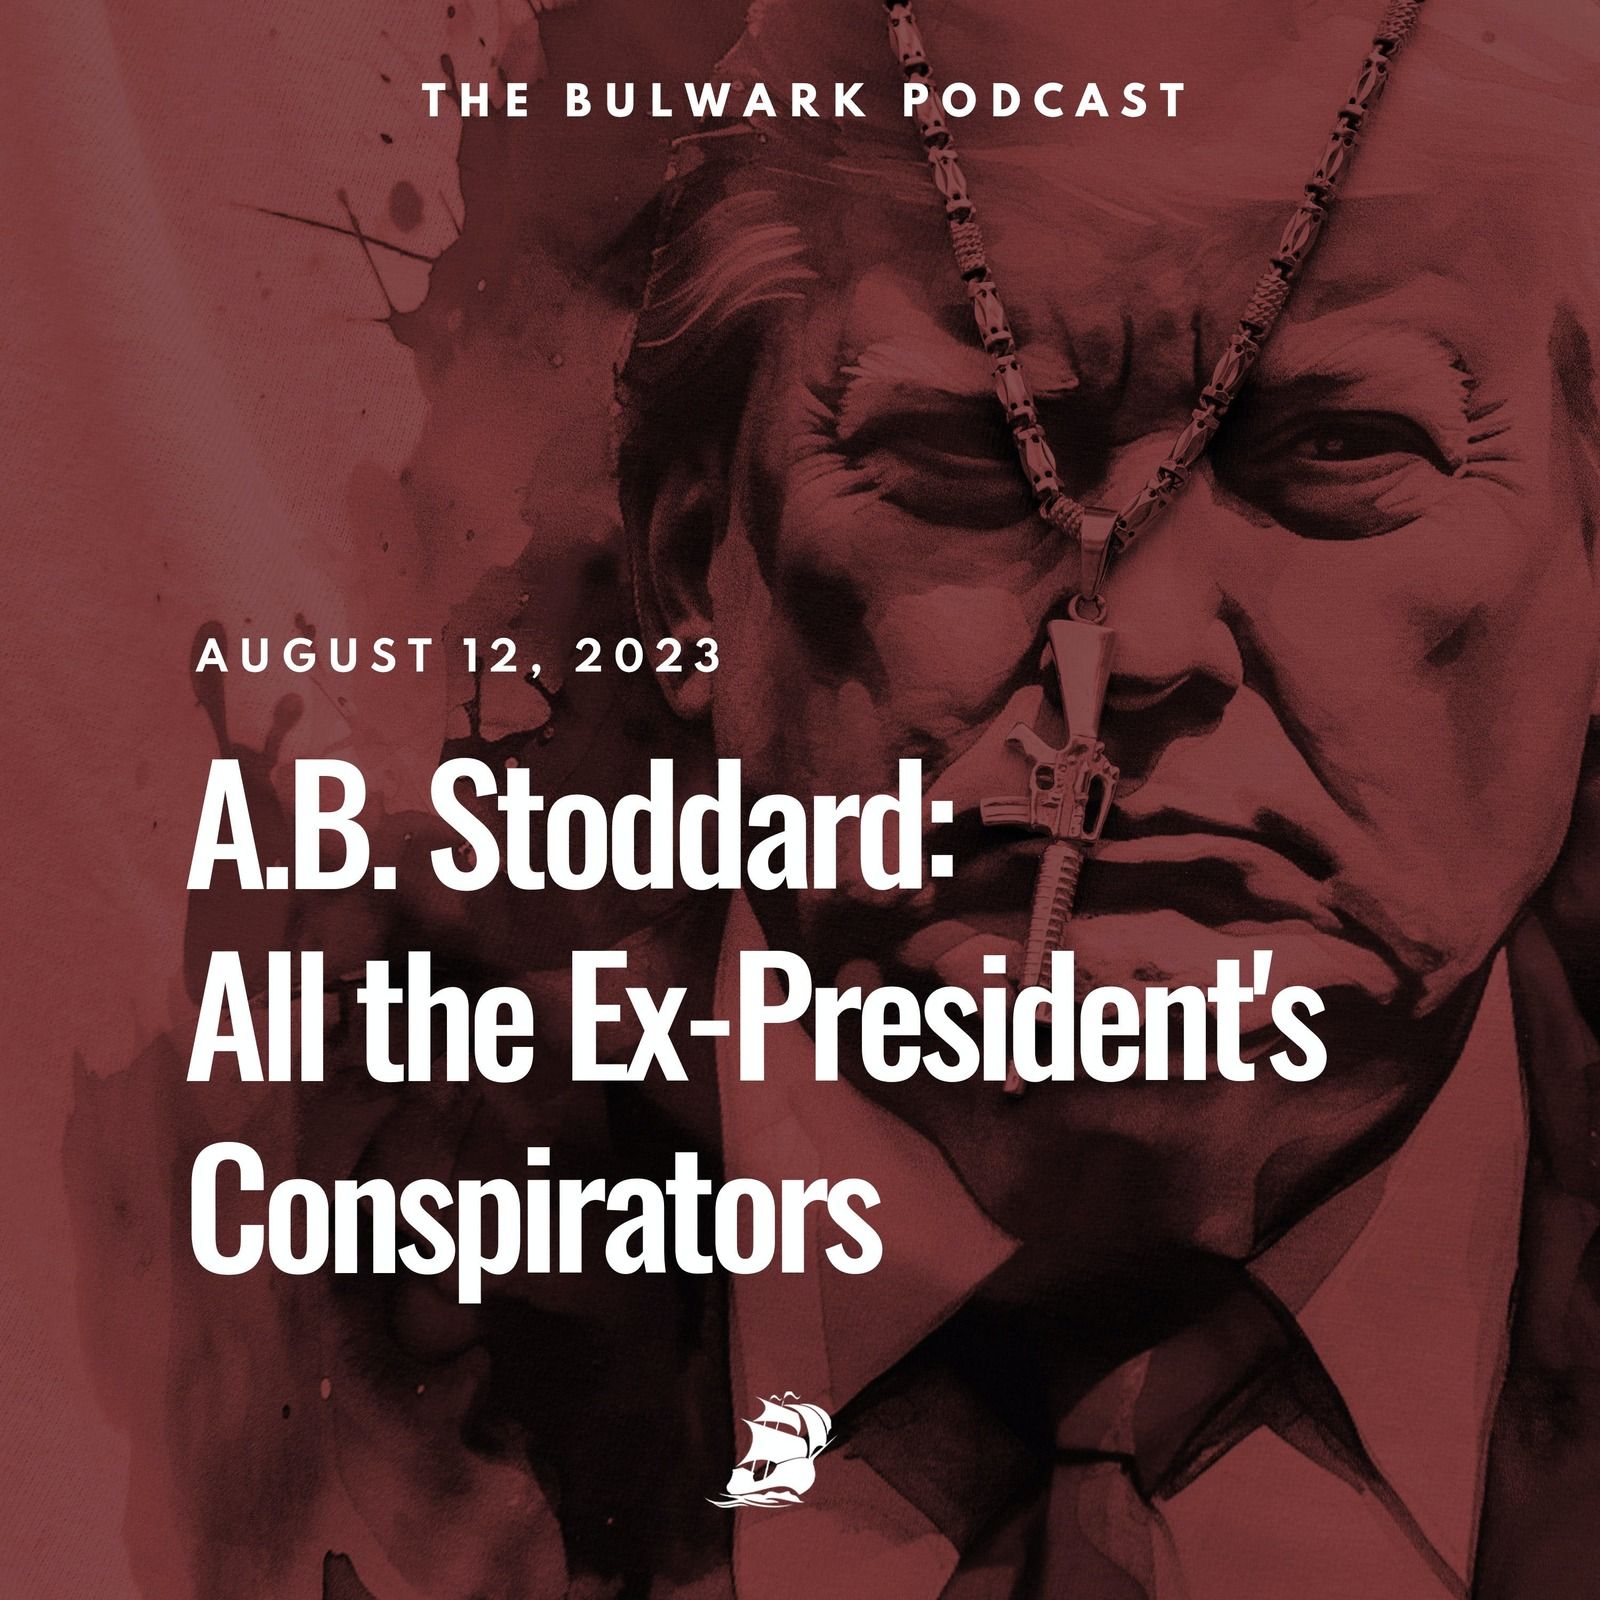 A.B. Stoddard: All the Ex-President's Conspirators by The Bulwark Podcast